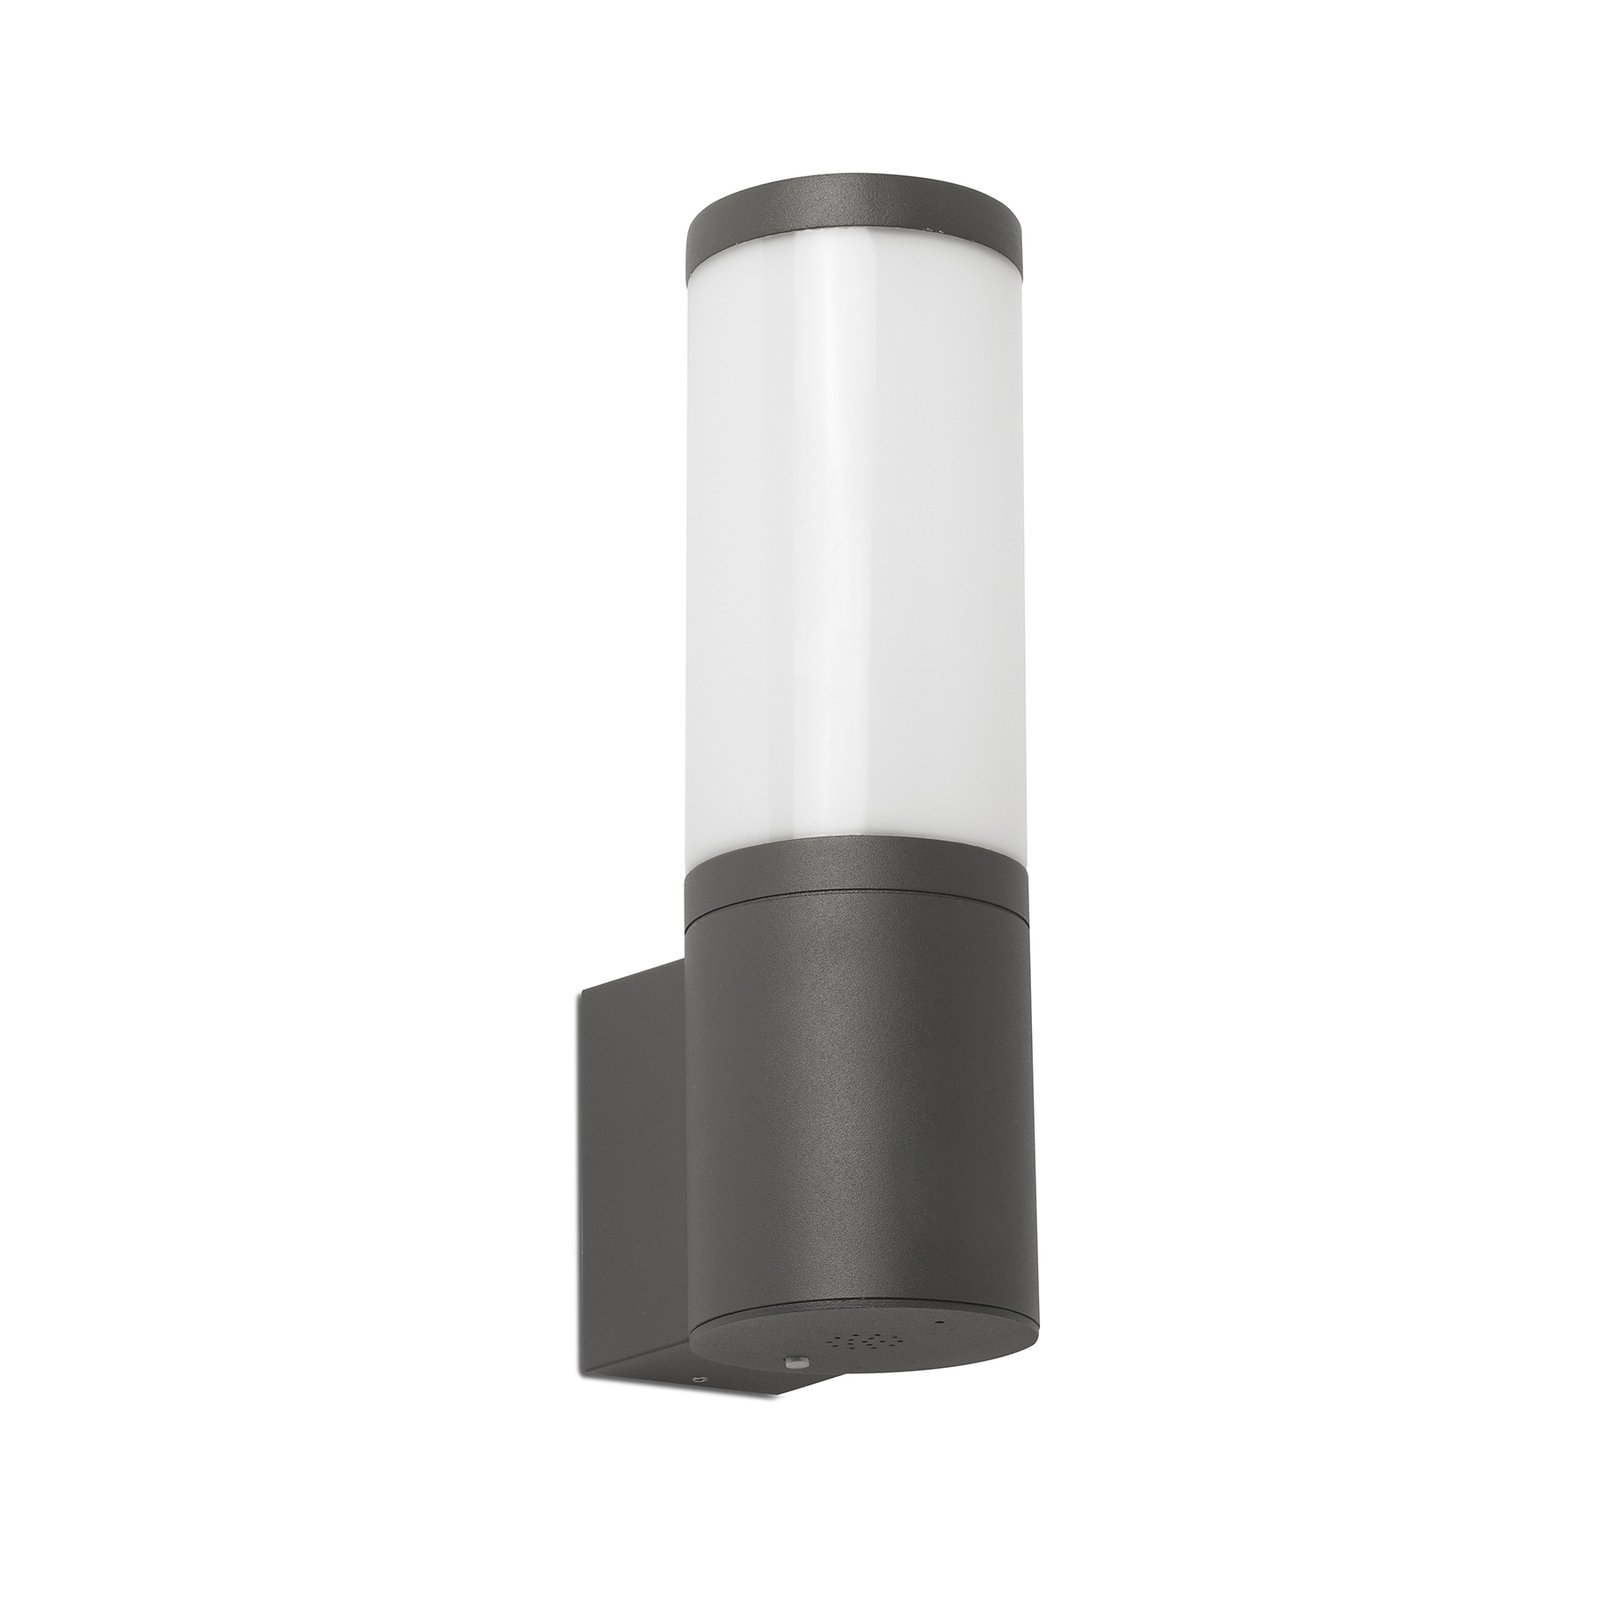 Orwell LED outdoor wall light